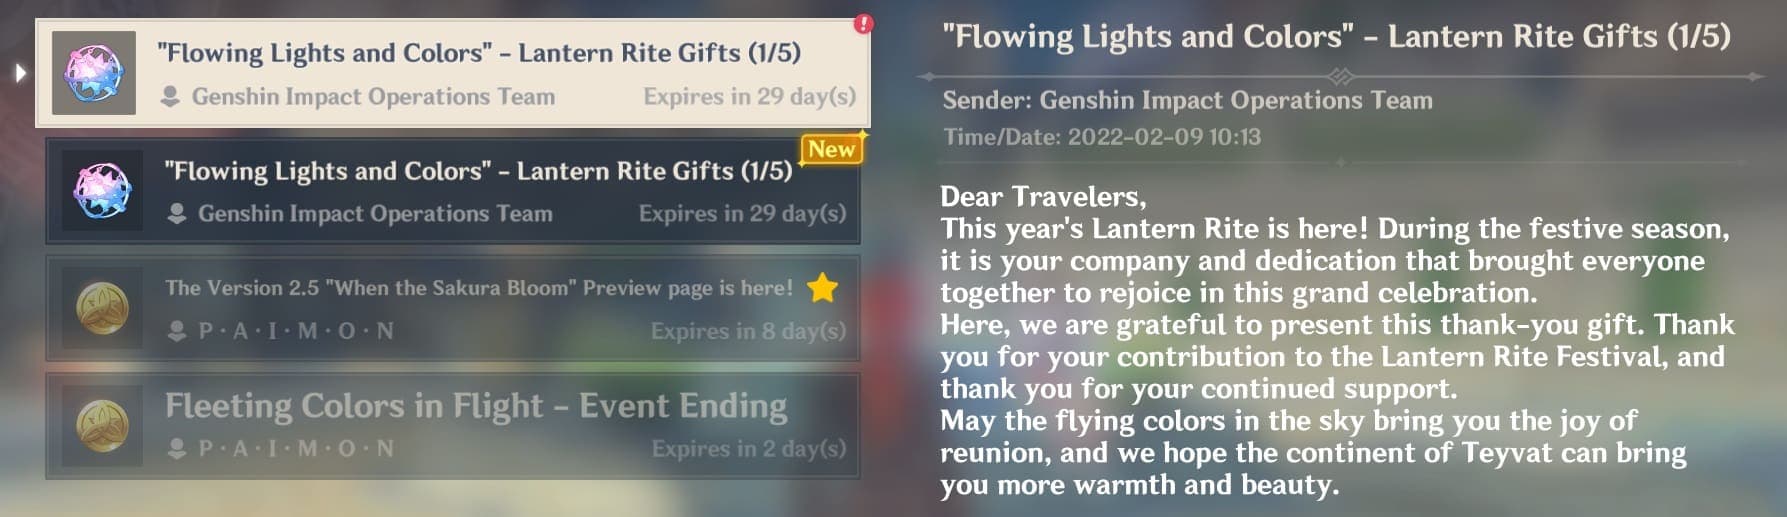 Genshin Impact in-game mail during Lantern Rite event with extra log-in reward.